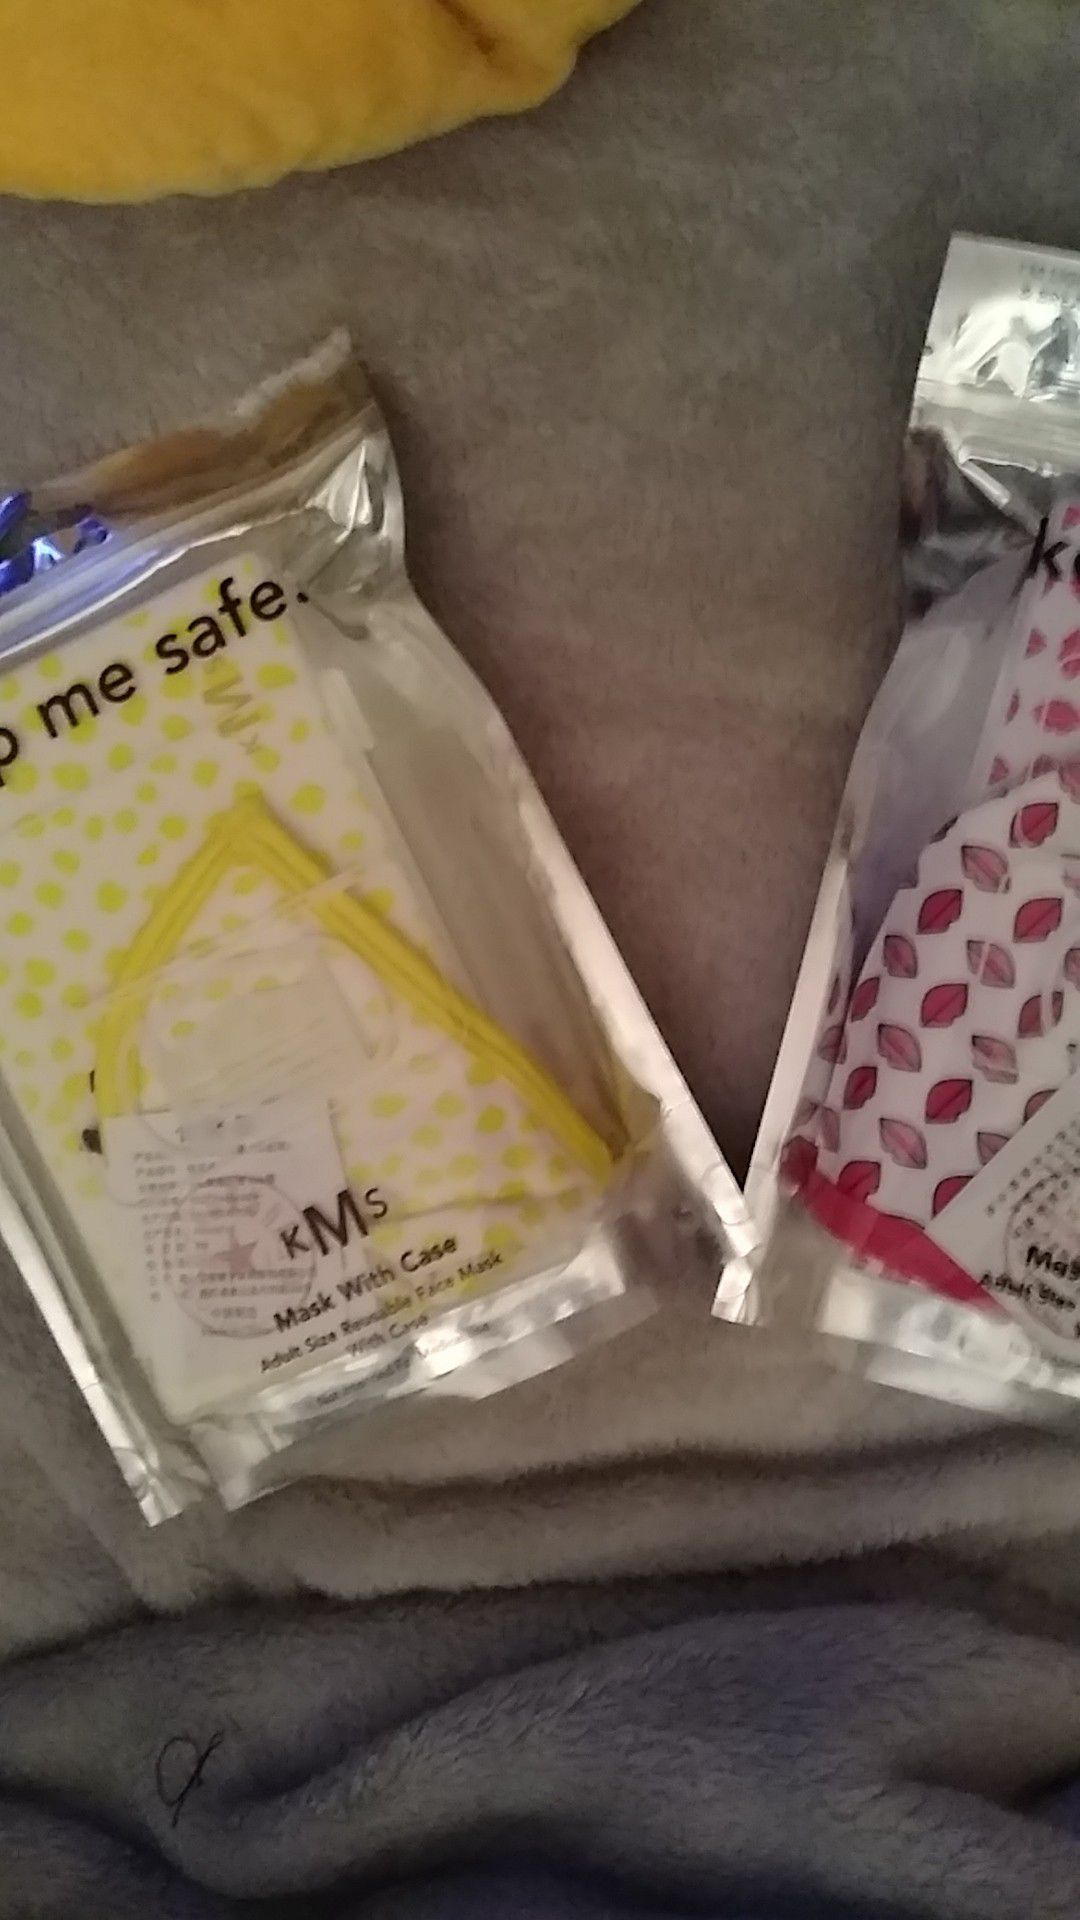 Keep me safe. Two different masks with cases. Adult size reusable face mask with case. $10 for both. New.